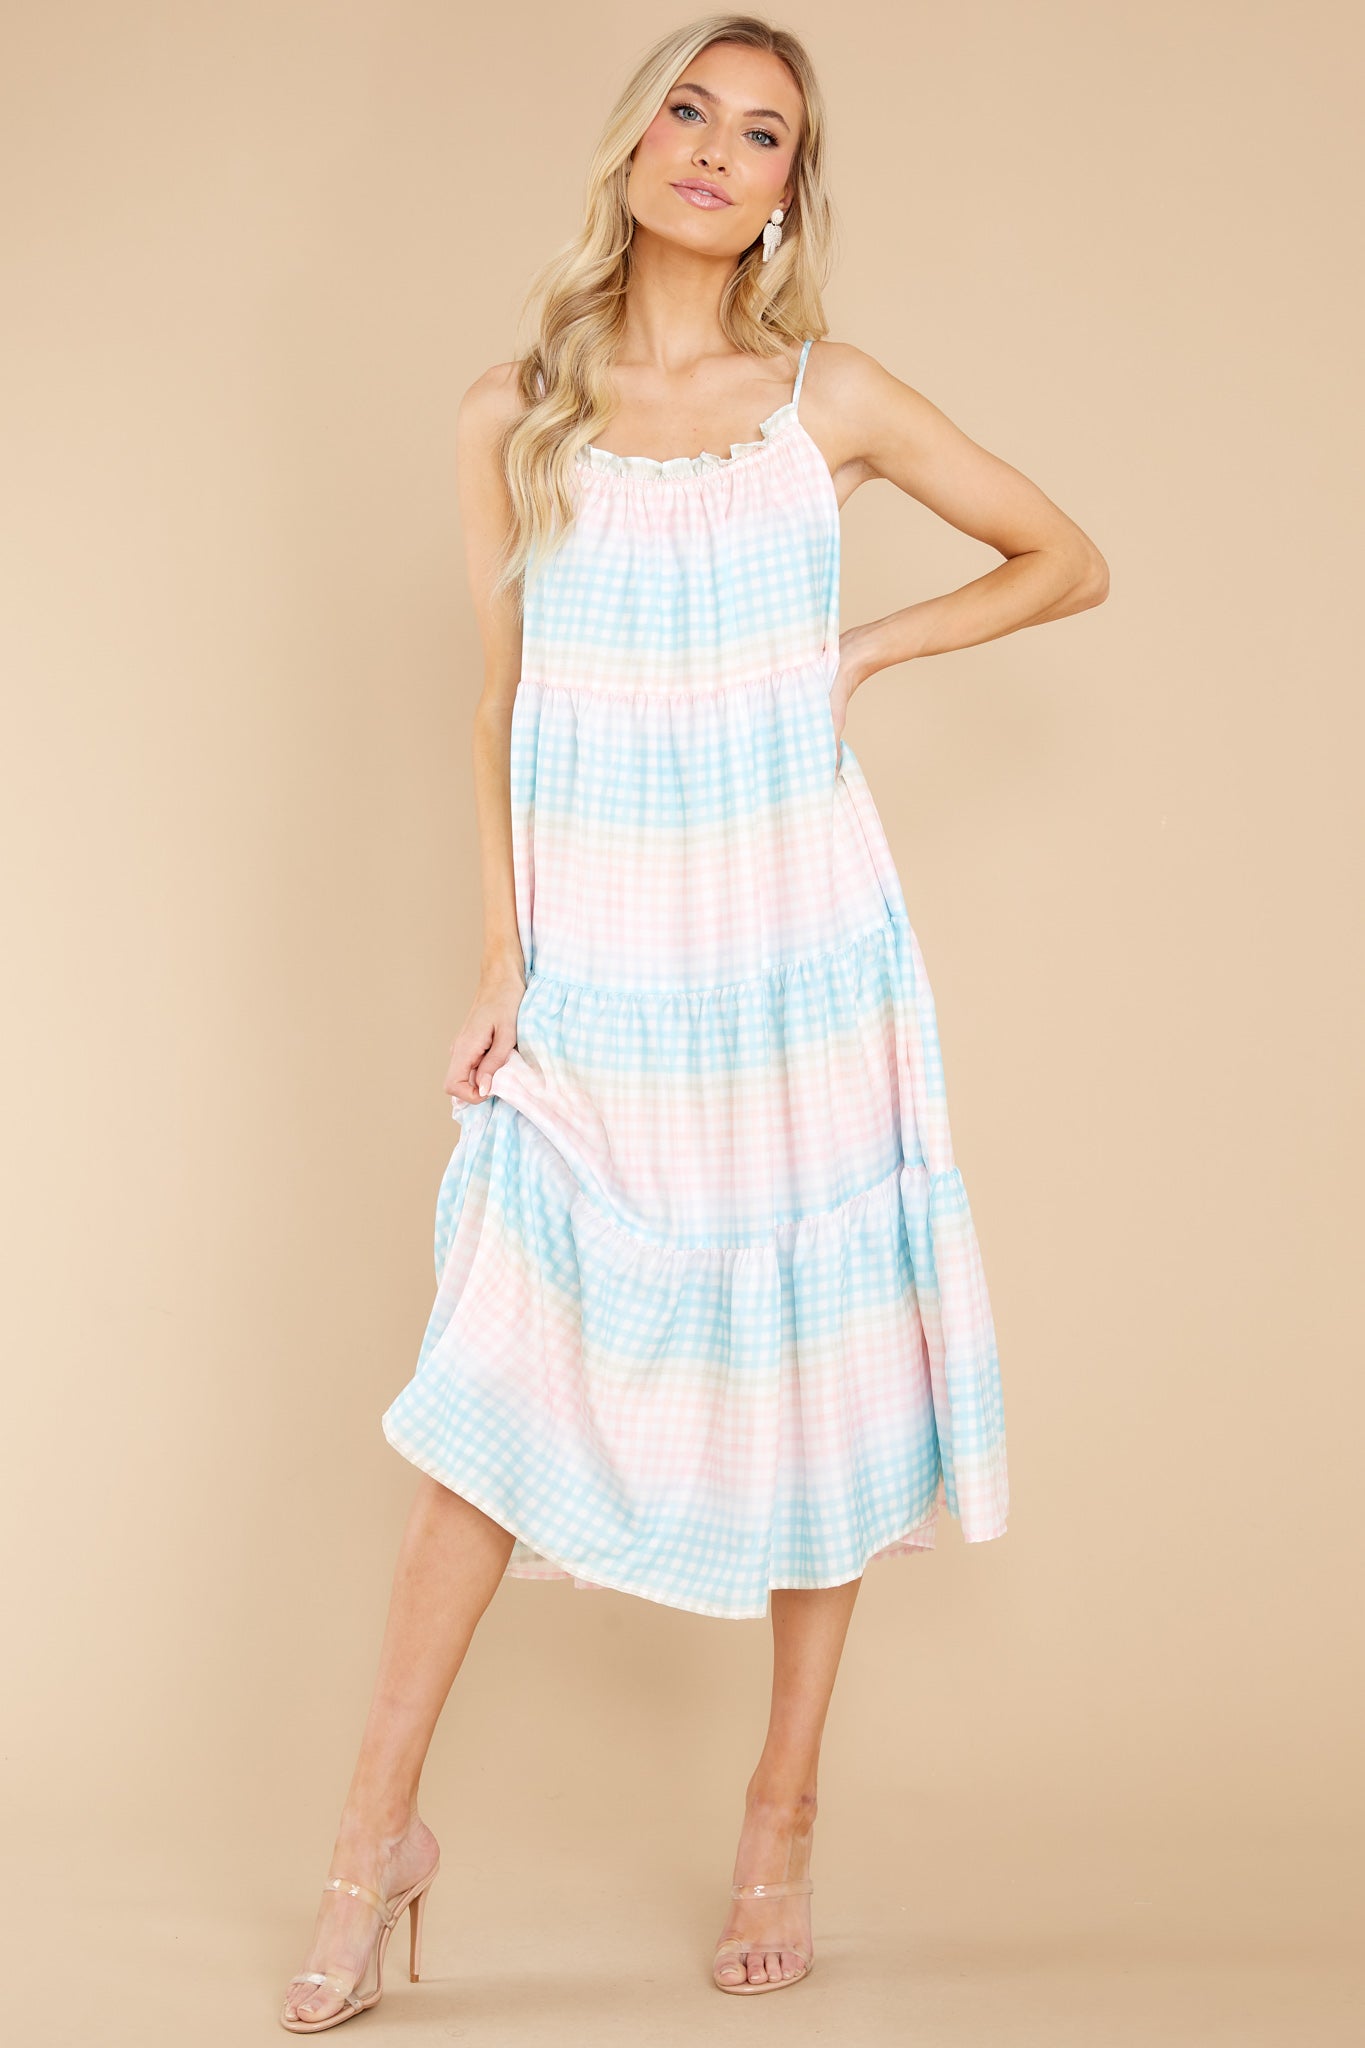 Pursuit Of Happiness Blue Multi Gingham Midi Dress - Red Dress